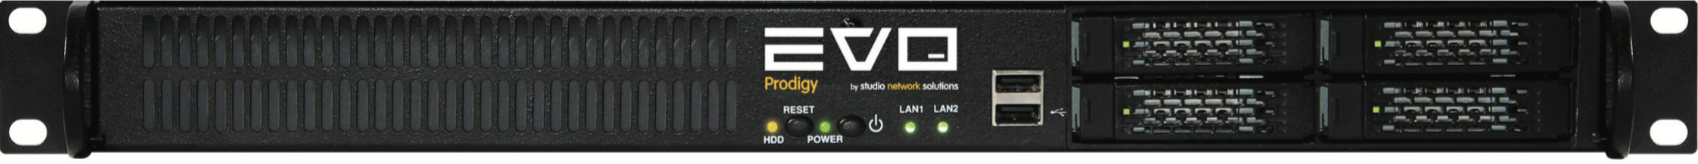 _images/Evo_Prodigy_front_Evo58.png